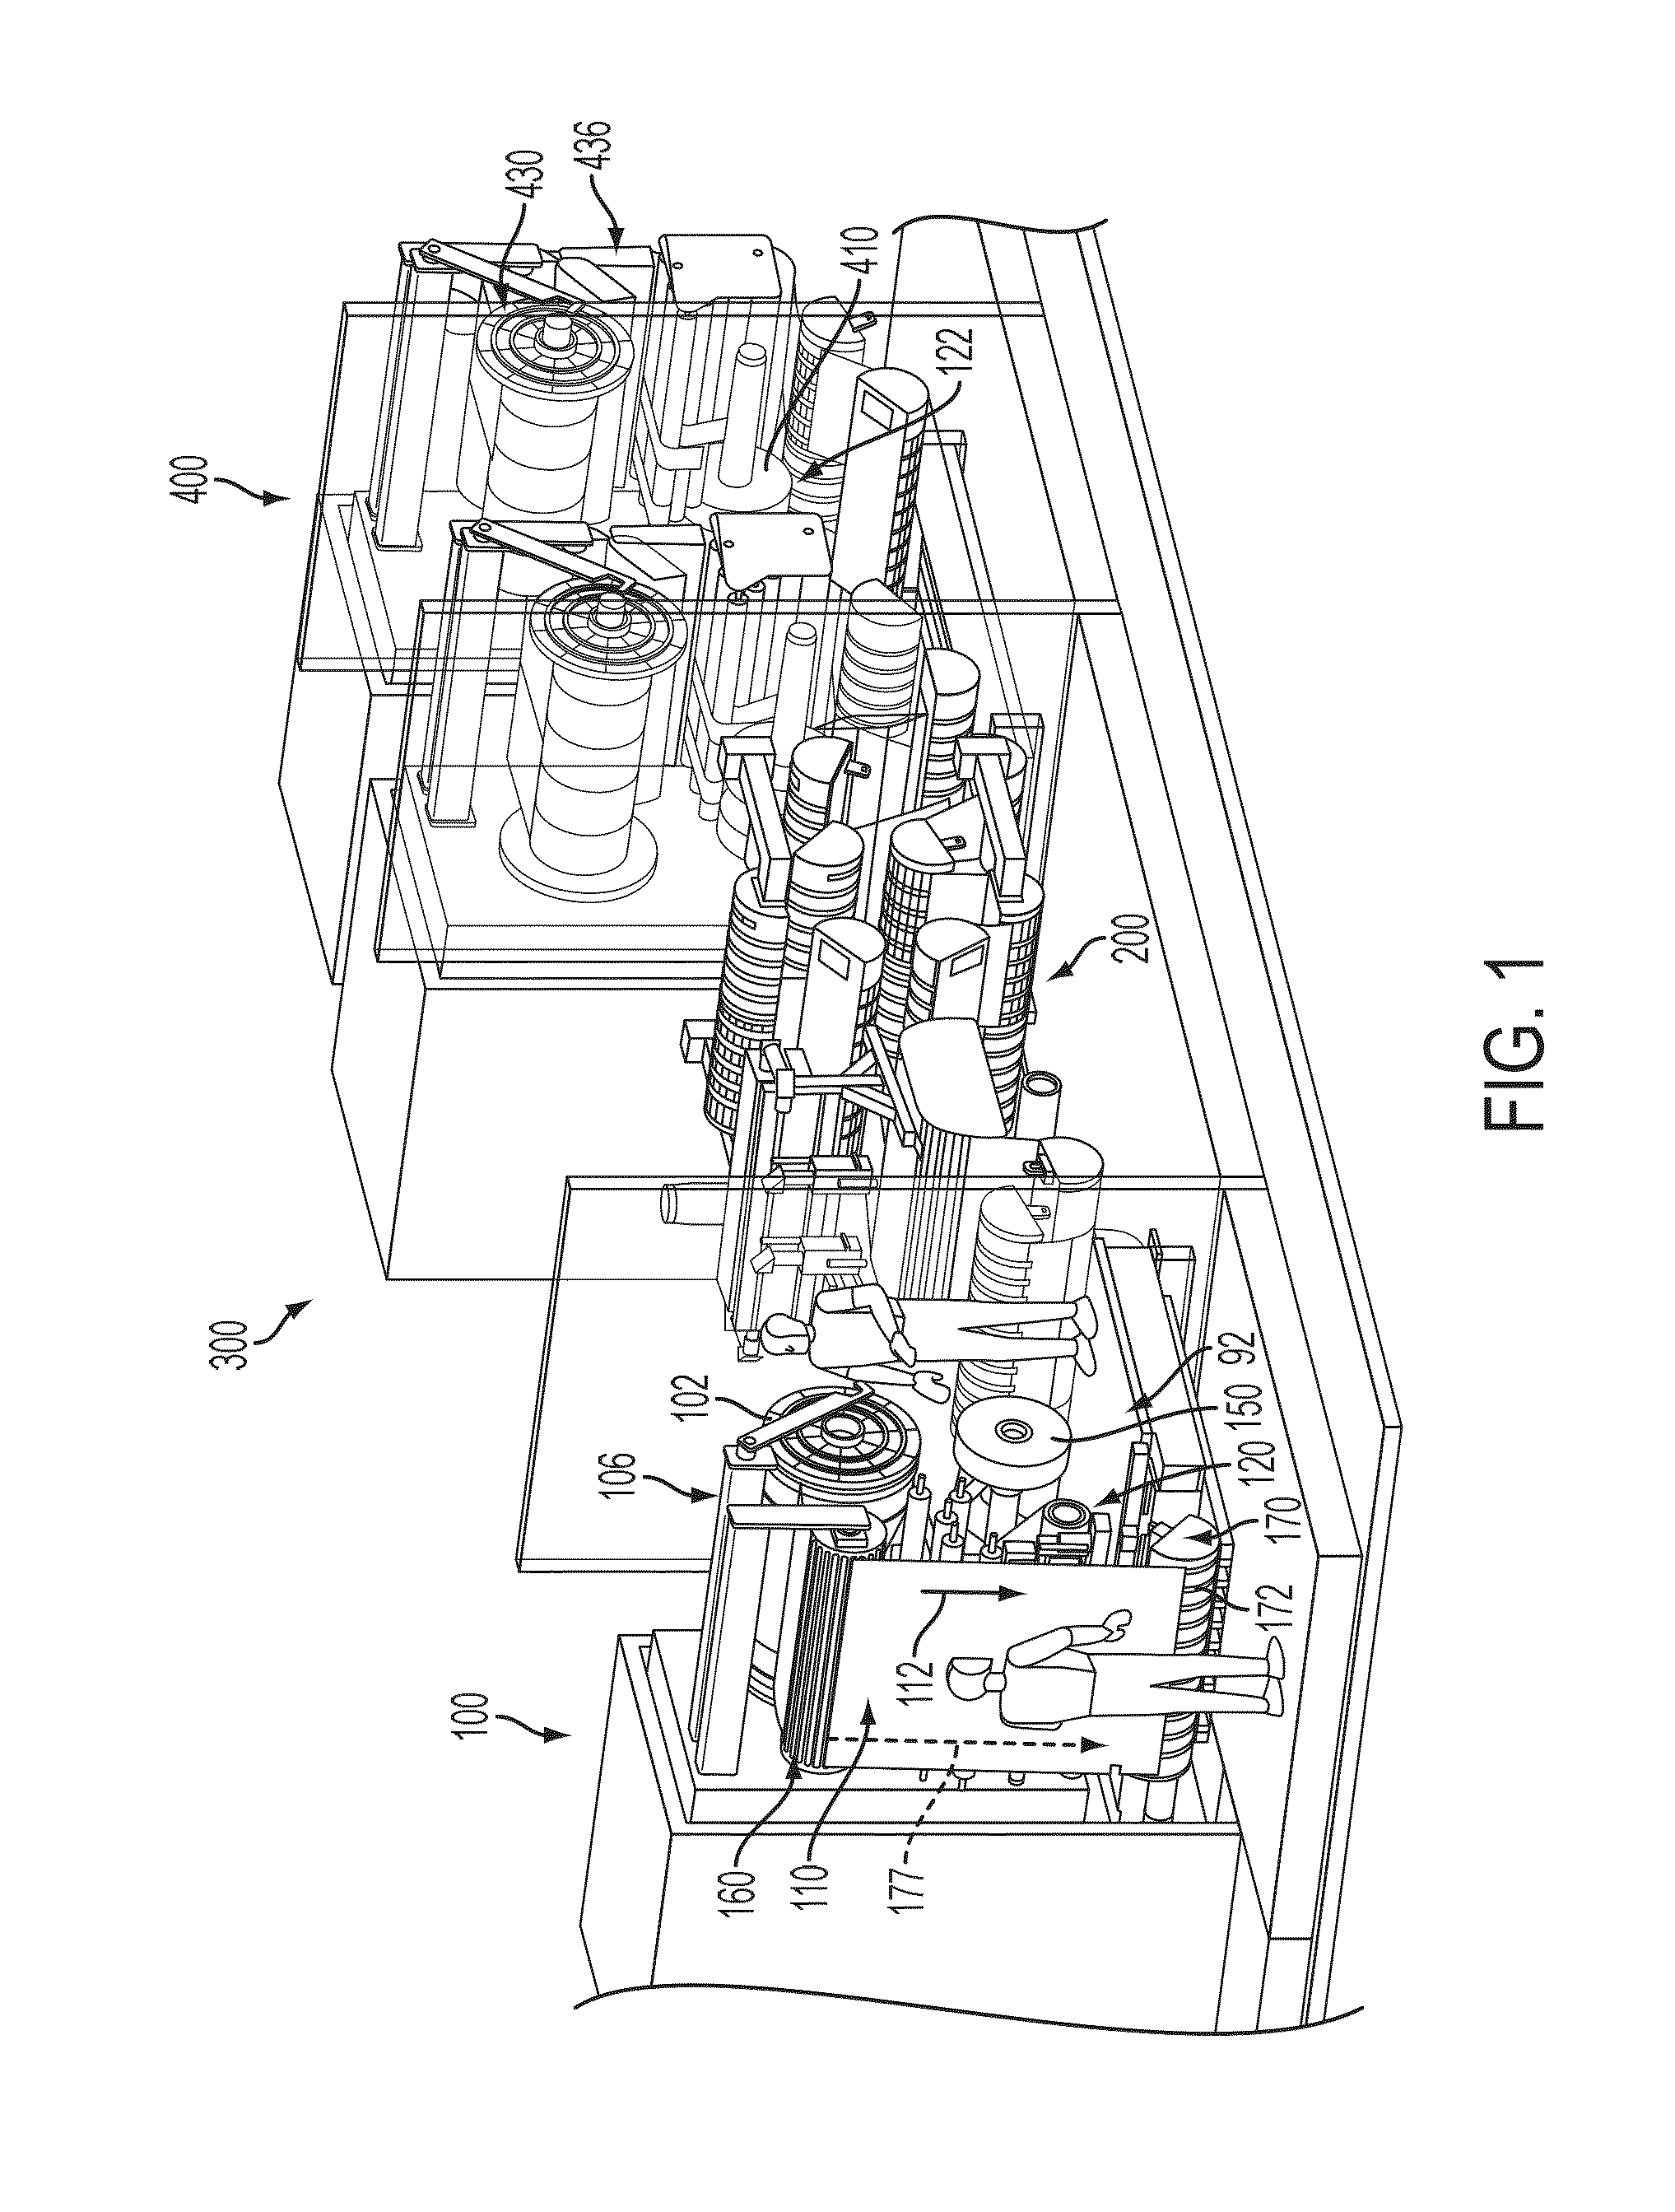 Apparatuses and methods to process flexible glass laminates